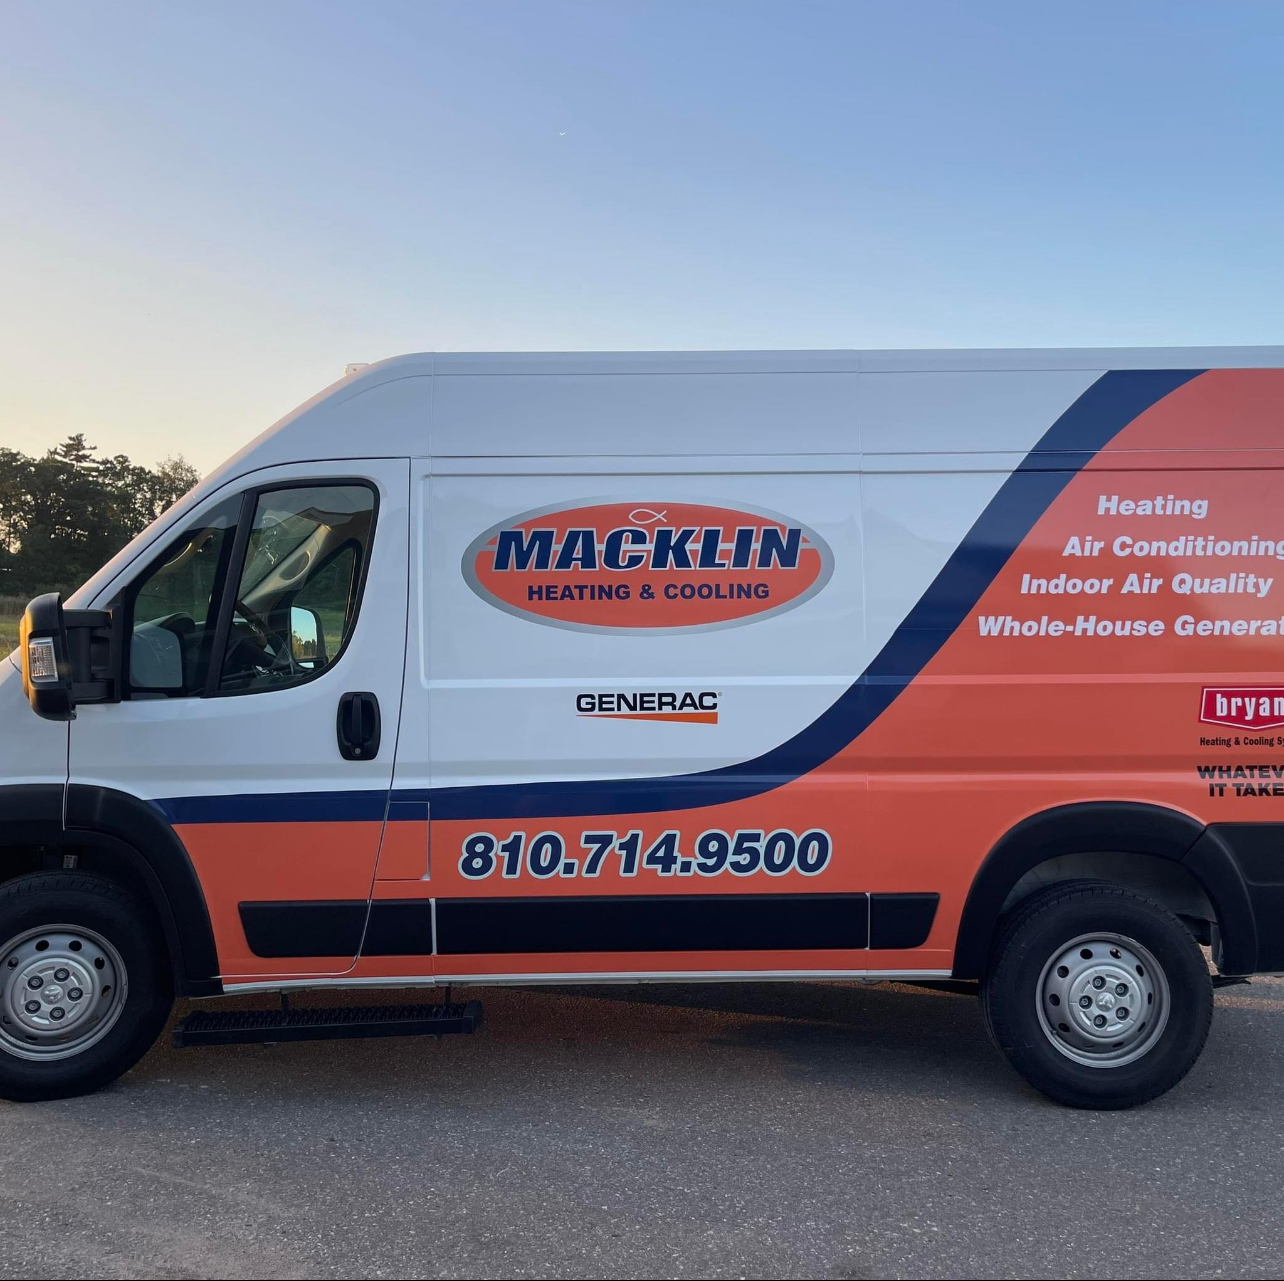 Macklin Heating and Cooling